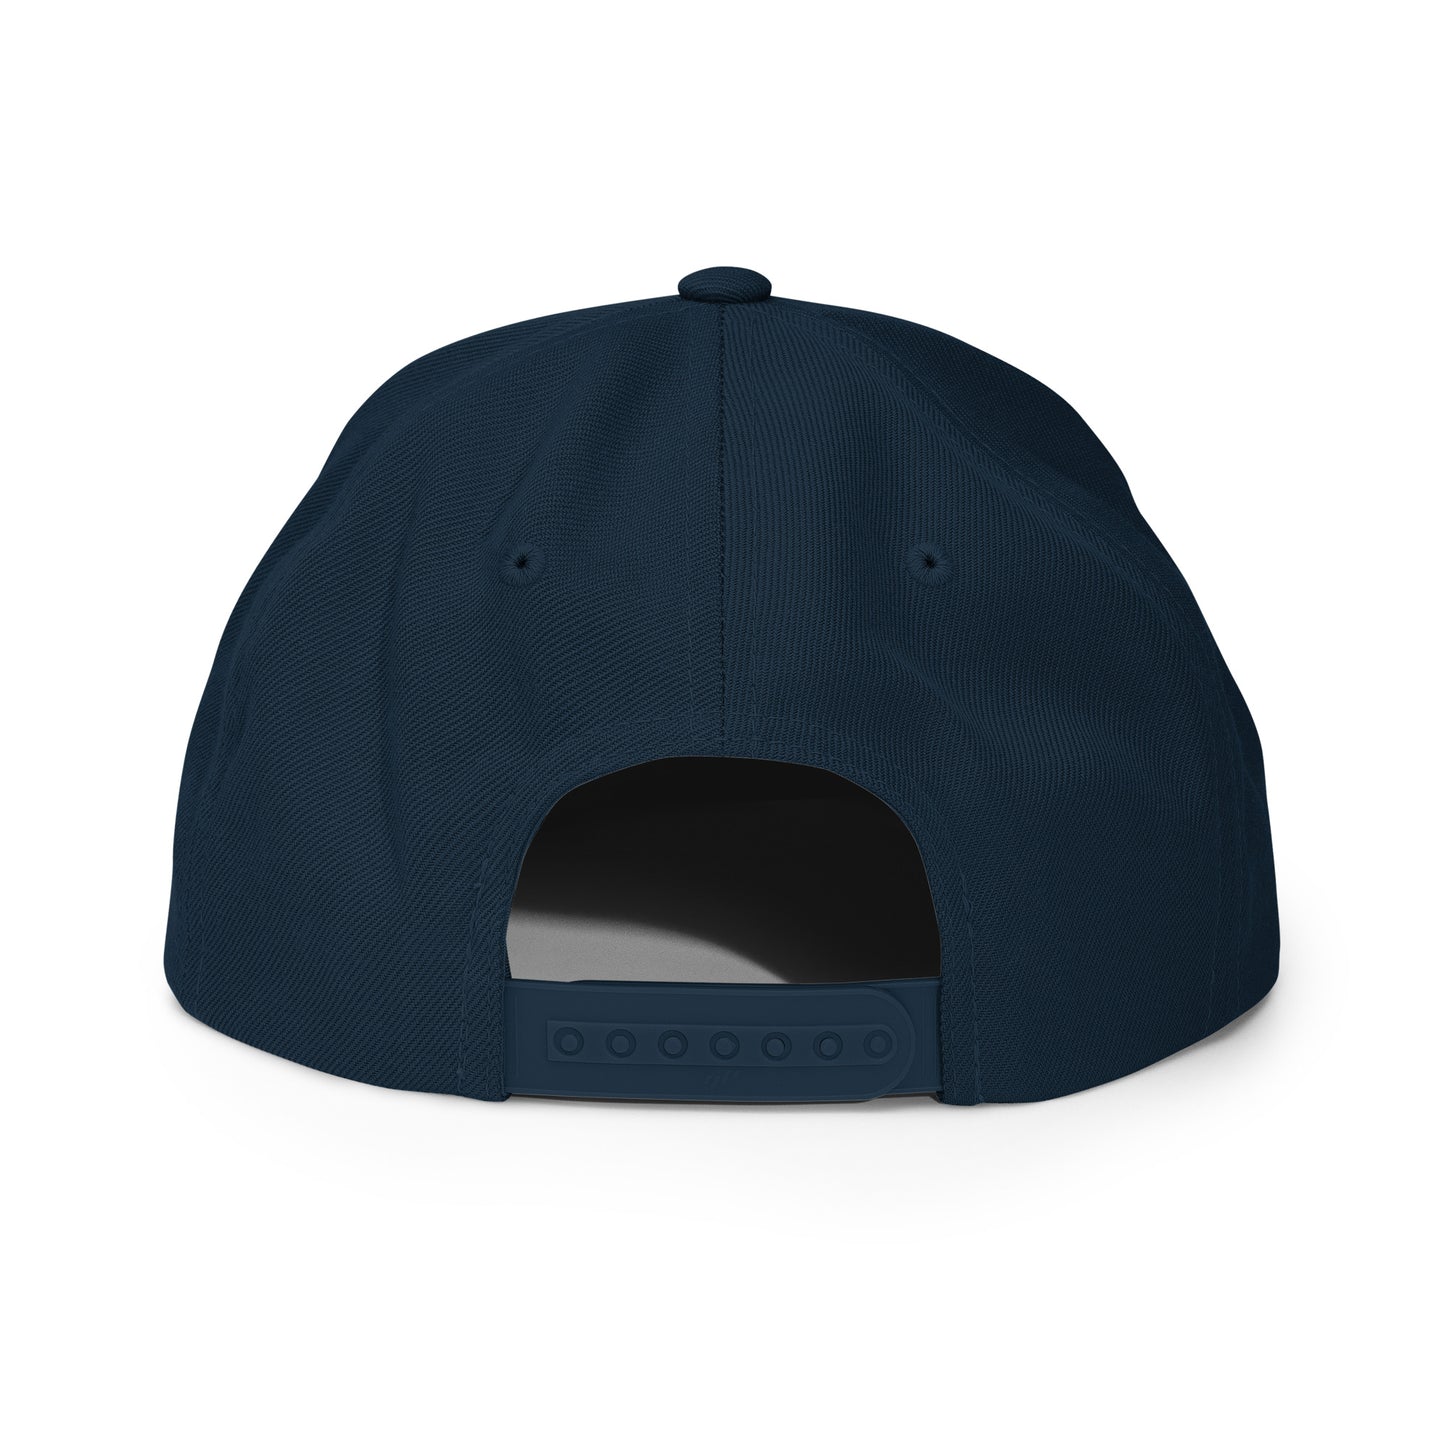 IVHF Snapback Embroidered Cap